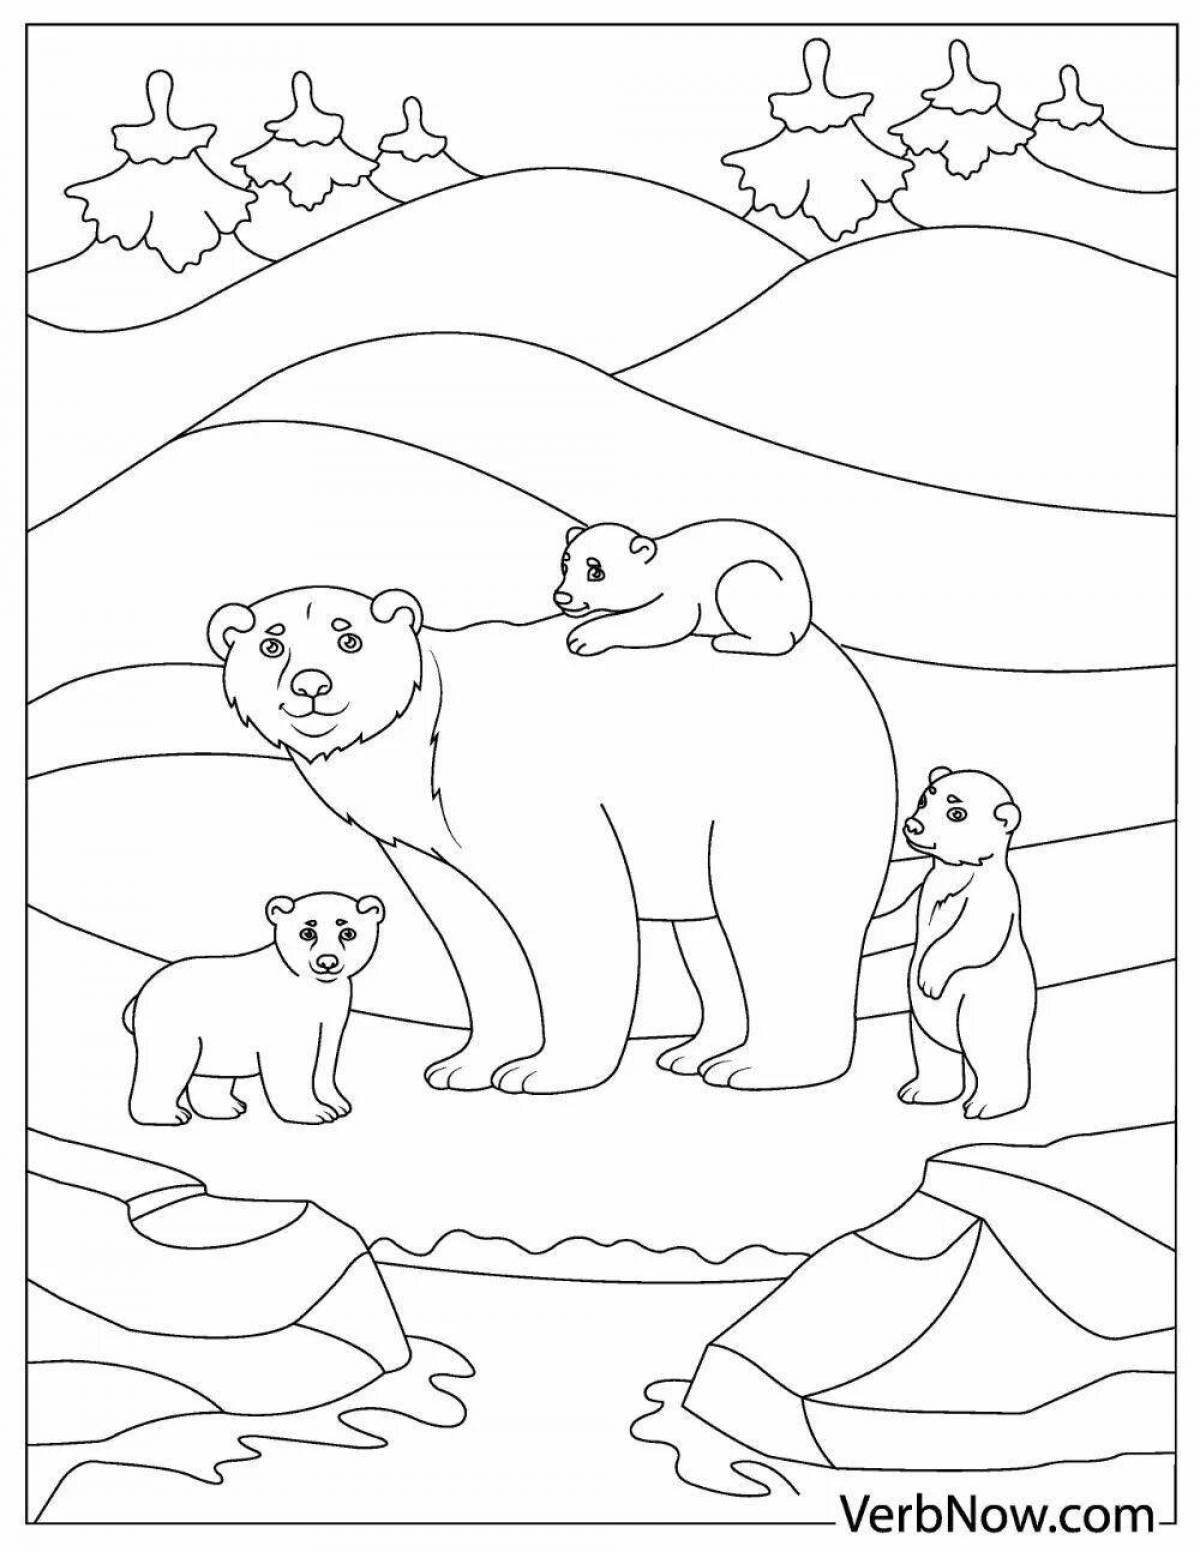 Coloring book exquisite bear in the north